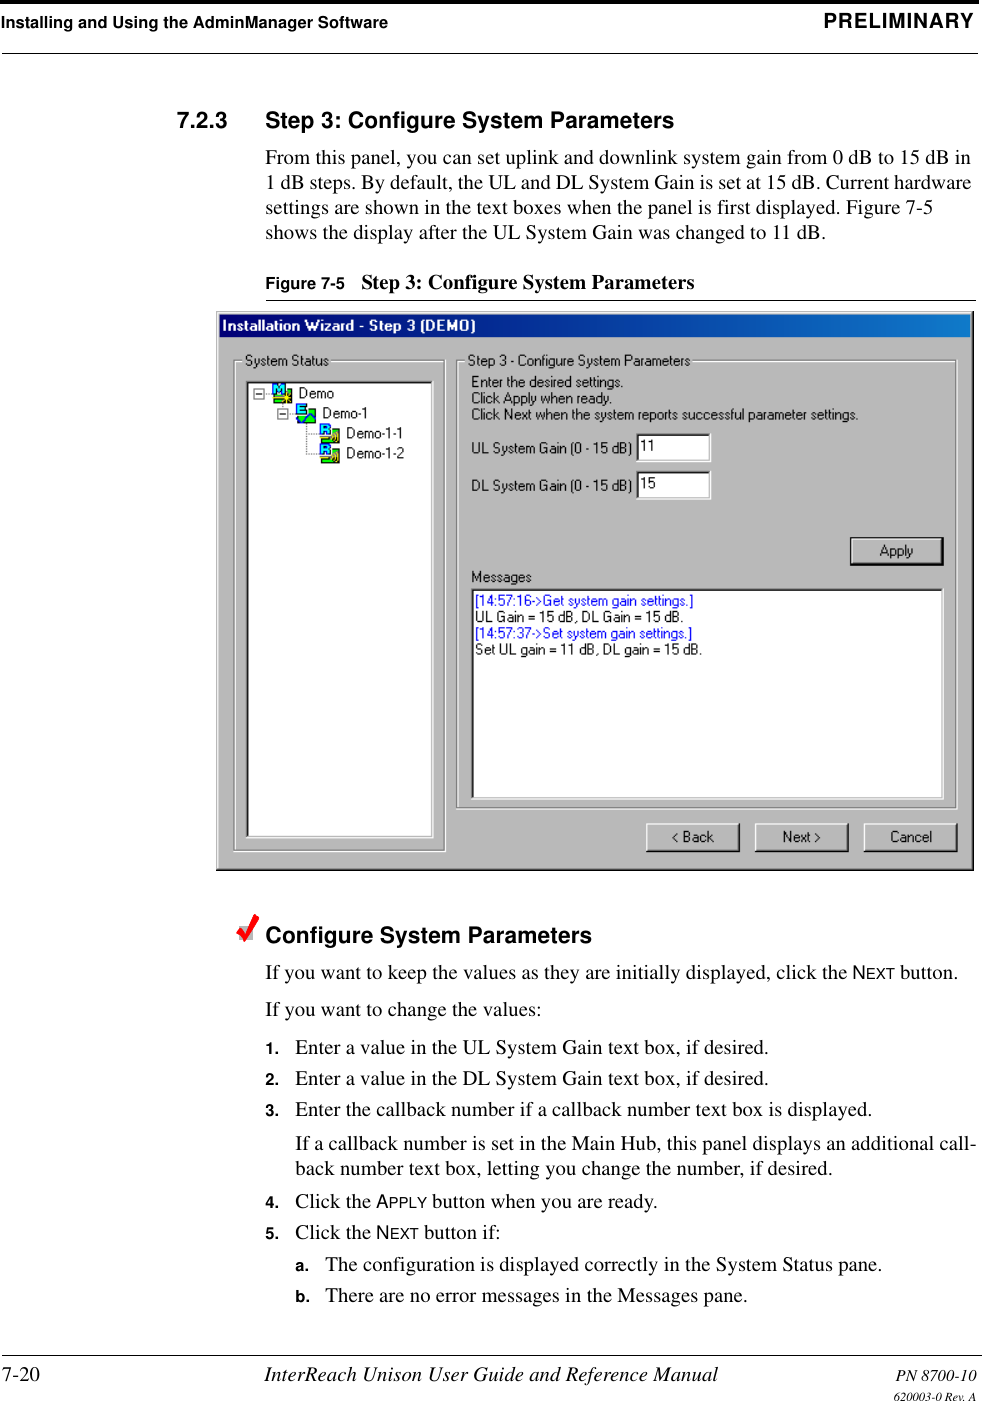 Installing and Using the AdminManager Software PRELIMINARY7-20 InterReach Unison User Guide and Reference Manual PN 8700-10620003-0 Rev. A7.2.3 Step 3: Configure System ParametersFrom this panel, you can set uplink and downlink system gain from 0 dB to 15 dB in 1 dB steps. By default, the UL and DL System Gain is set at 15 dB. Current hardware settings are shown in the text boxes when the panel is first displayed. Figure 7-5 shows the display after the UL System Gain was changed to 11 dB.Figure 7-5 Step 3: Configure System ParametersConfigure System ParametersIf you want to keep the values as they are initially displayed, click the NEXT button.If you want to change the values:1. Enter a value in the UL System Gain text box, if desired.2. Enter a value in the DL System Gain text box, if desired.3. Enter the callback number if a callback number text box is displayed.If a callback number is set in the Main Hub, this panel displays an additional call-back number text box, letting you change the number, if desired.4. Click the APPLY button when you are ready.5. Click the NEXT button if:a. The configuration is displayed correctly in the System Status pane.b. There are no error messages in the Messages pane.